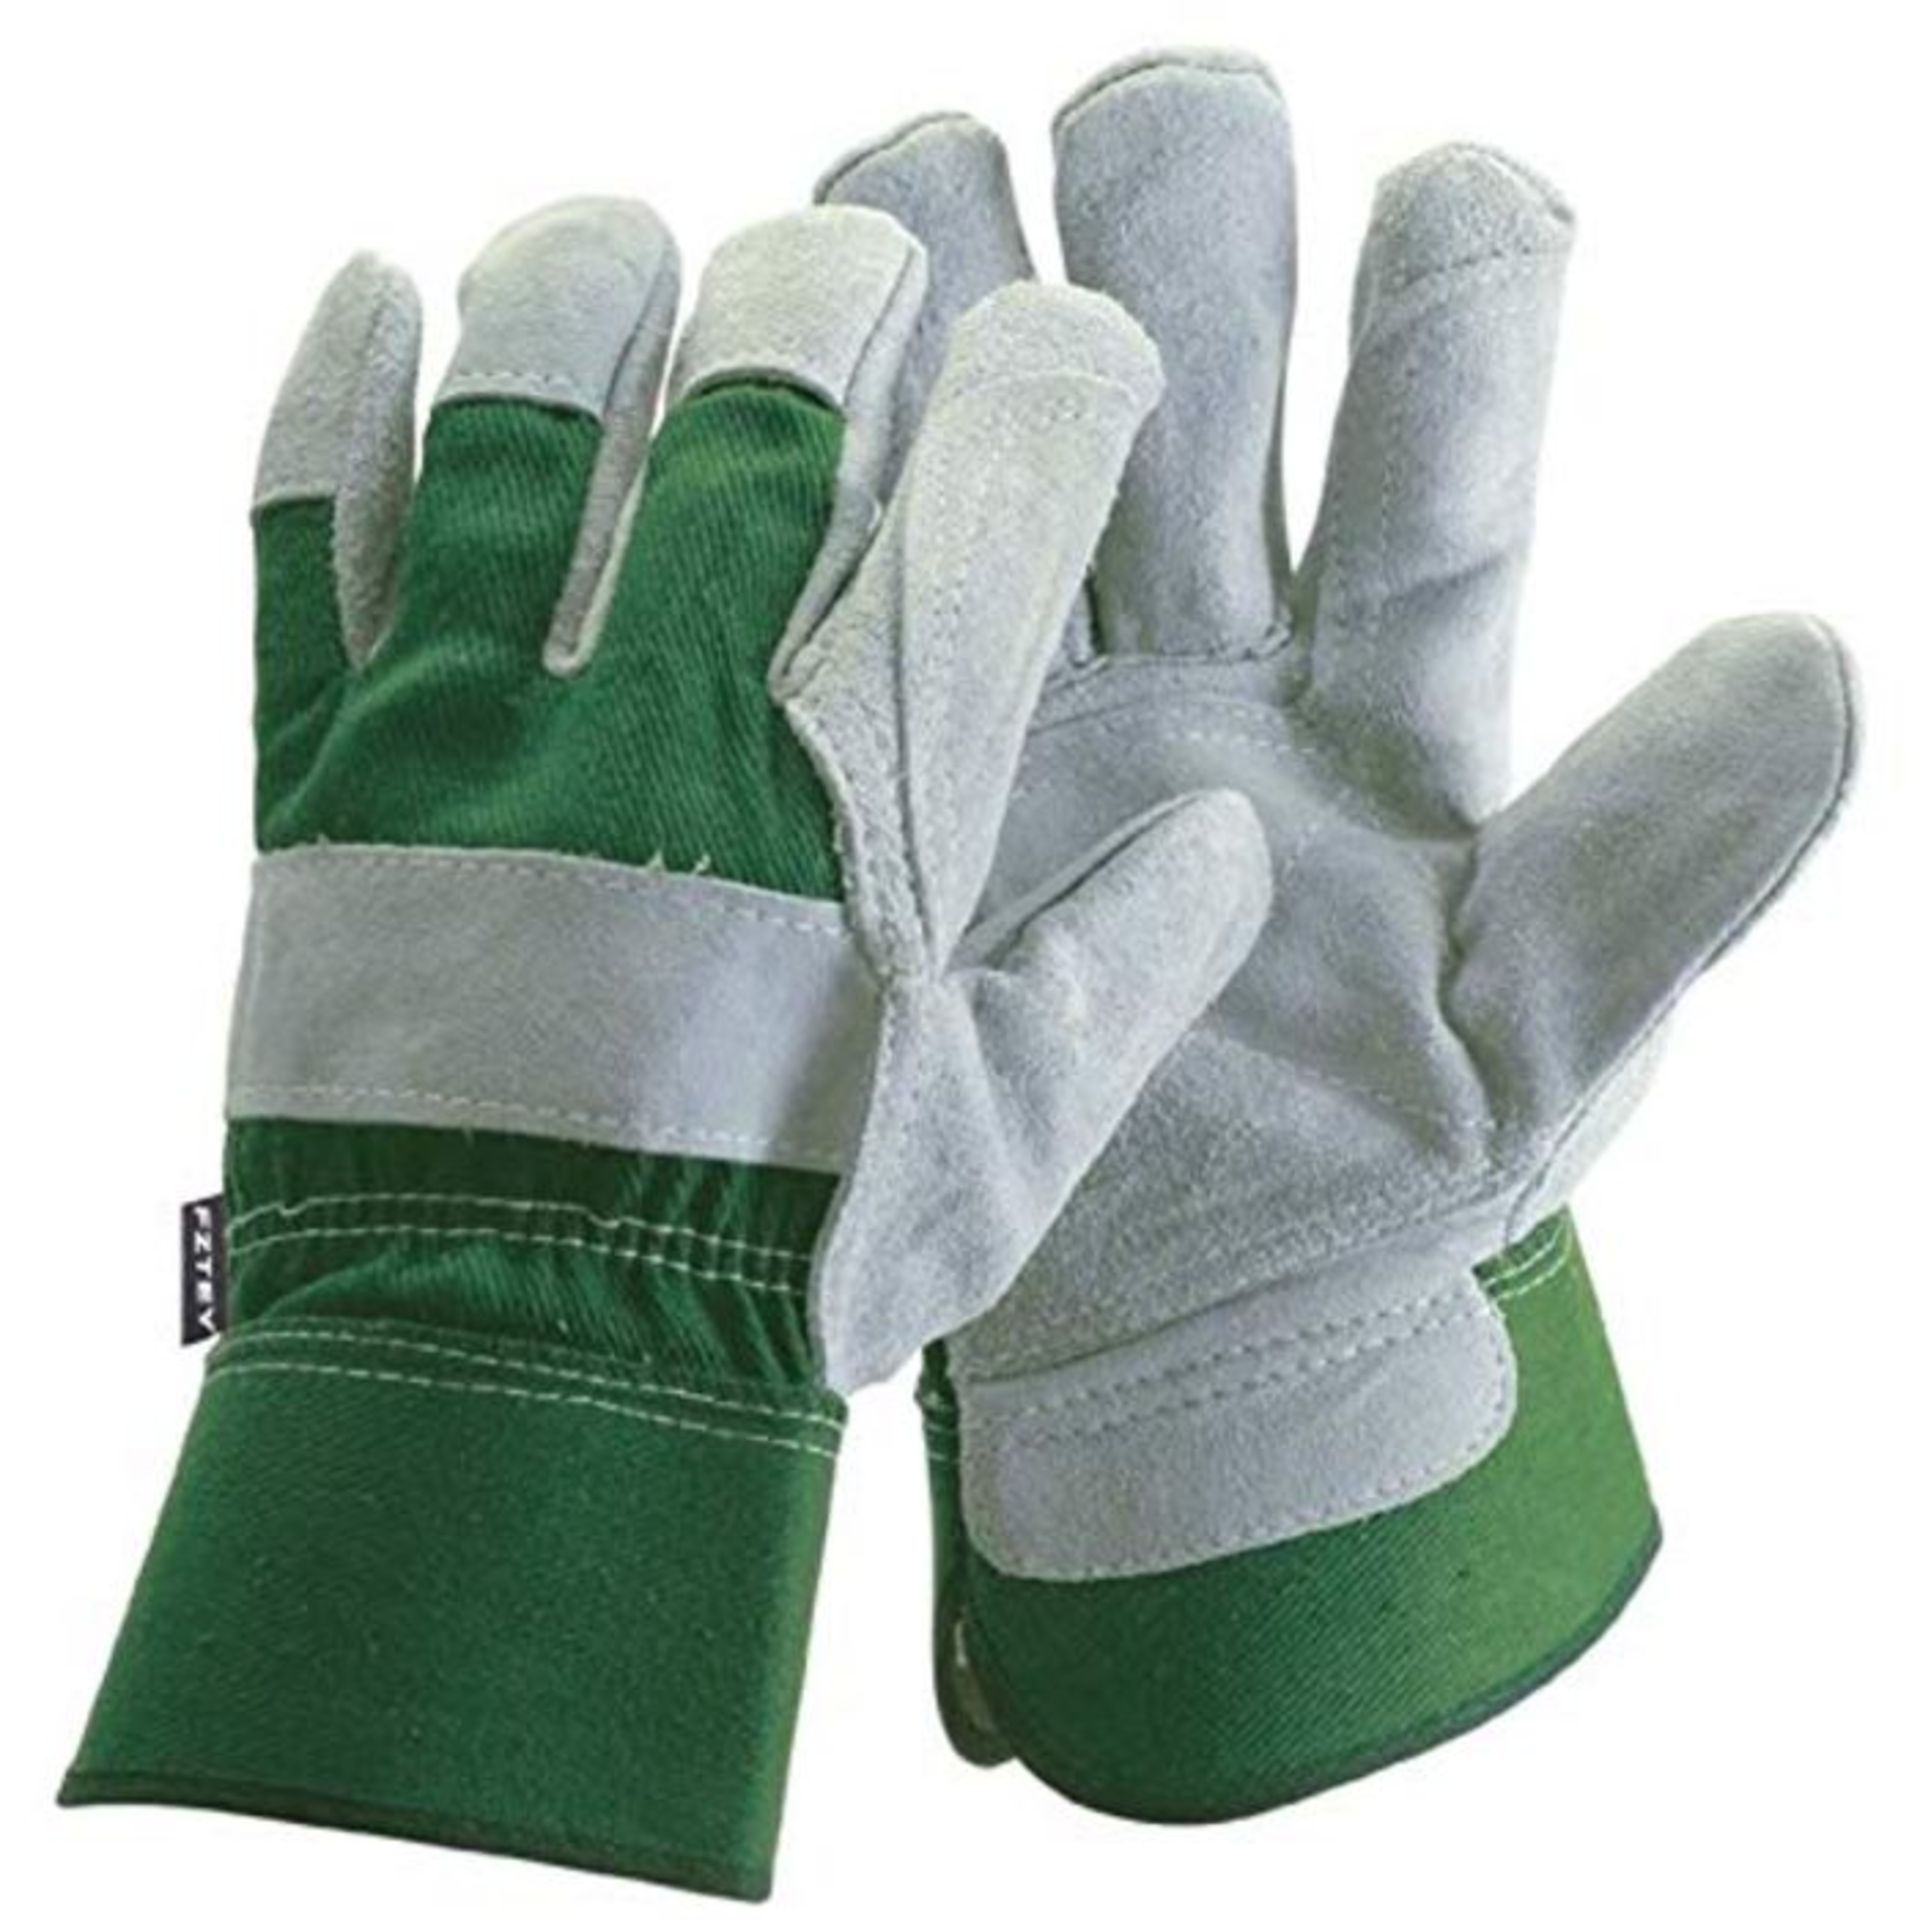 FZTEY Thick Gardening Work Gauntlets , Reinforced Leather Heavy duty Cut Knife Thermal